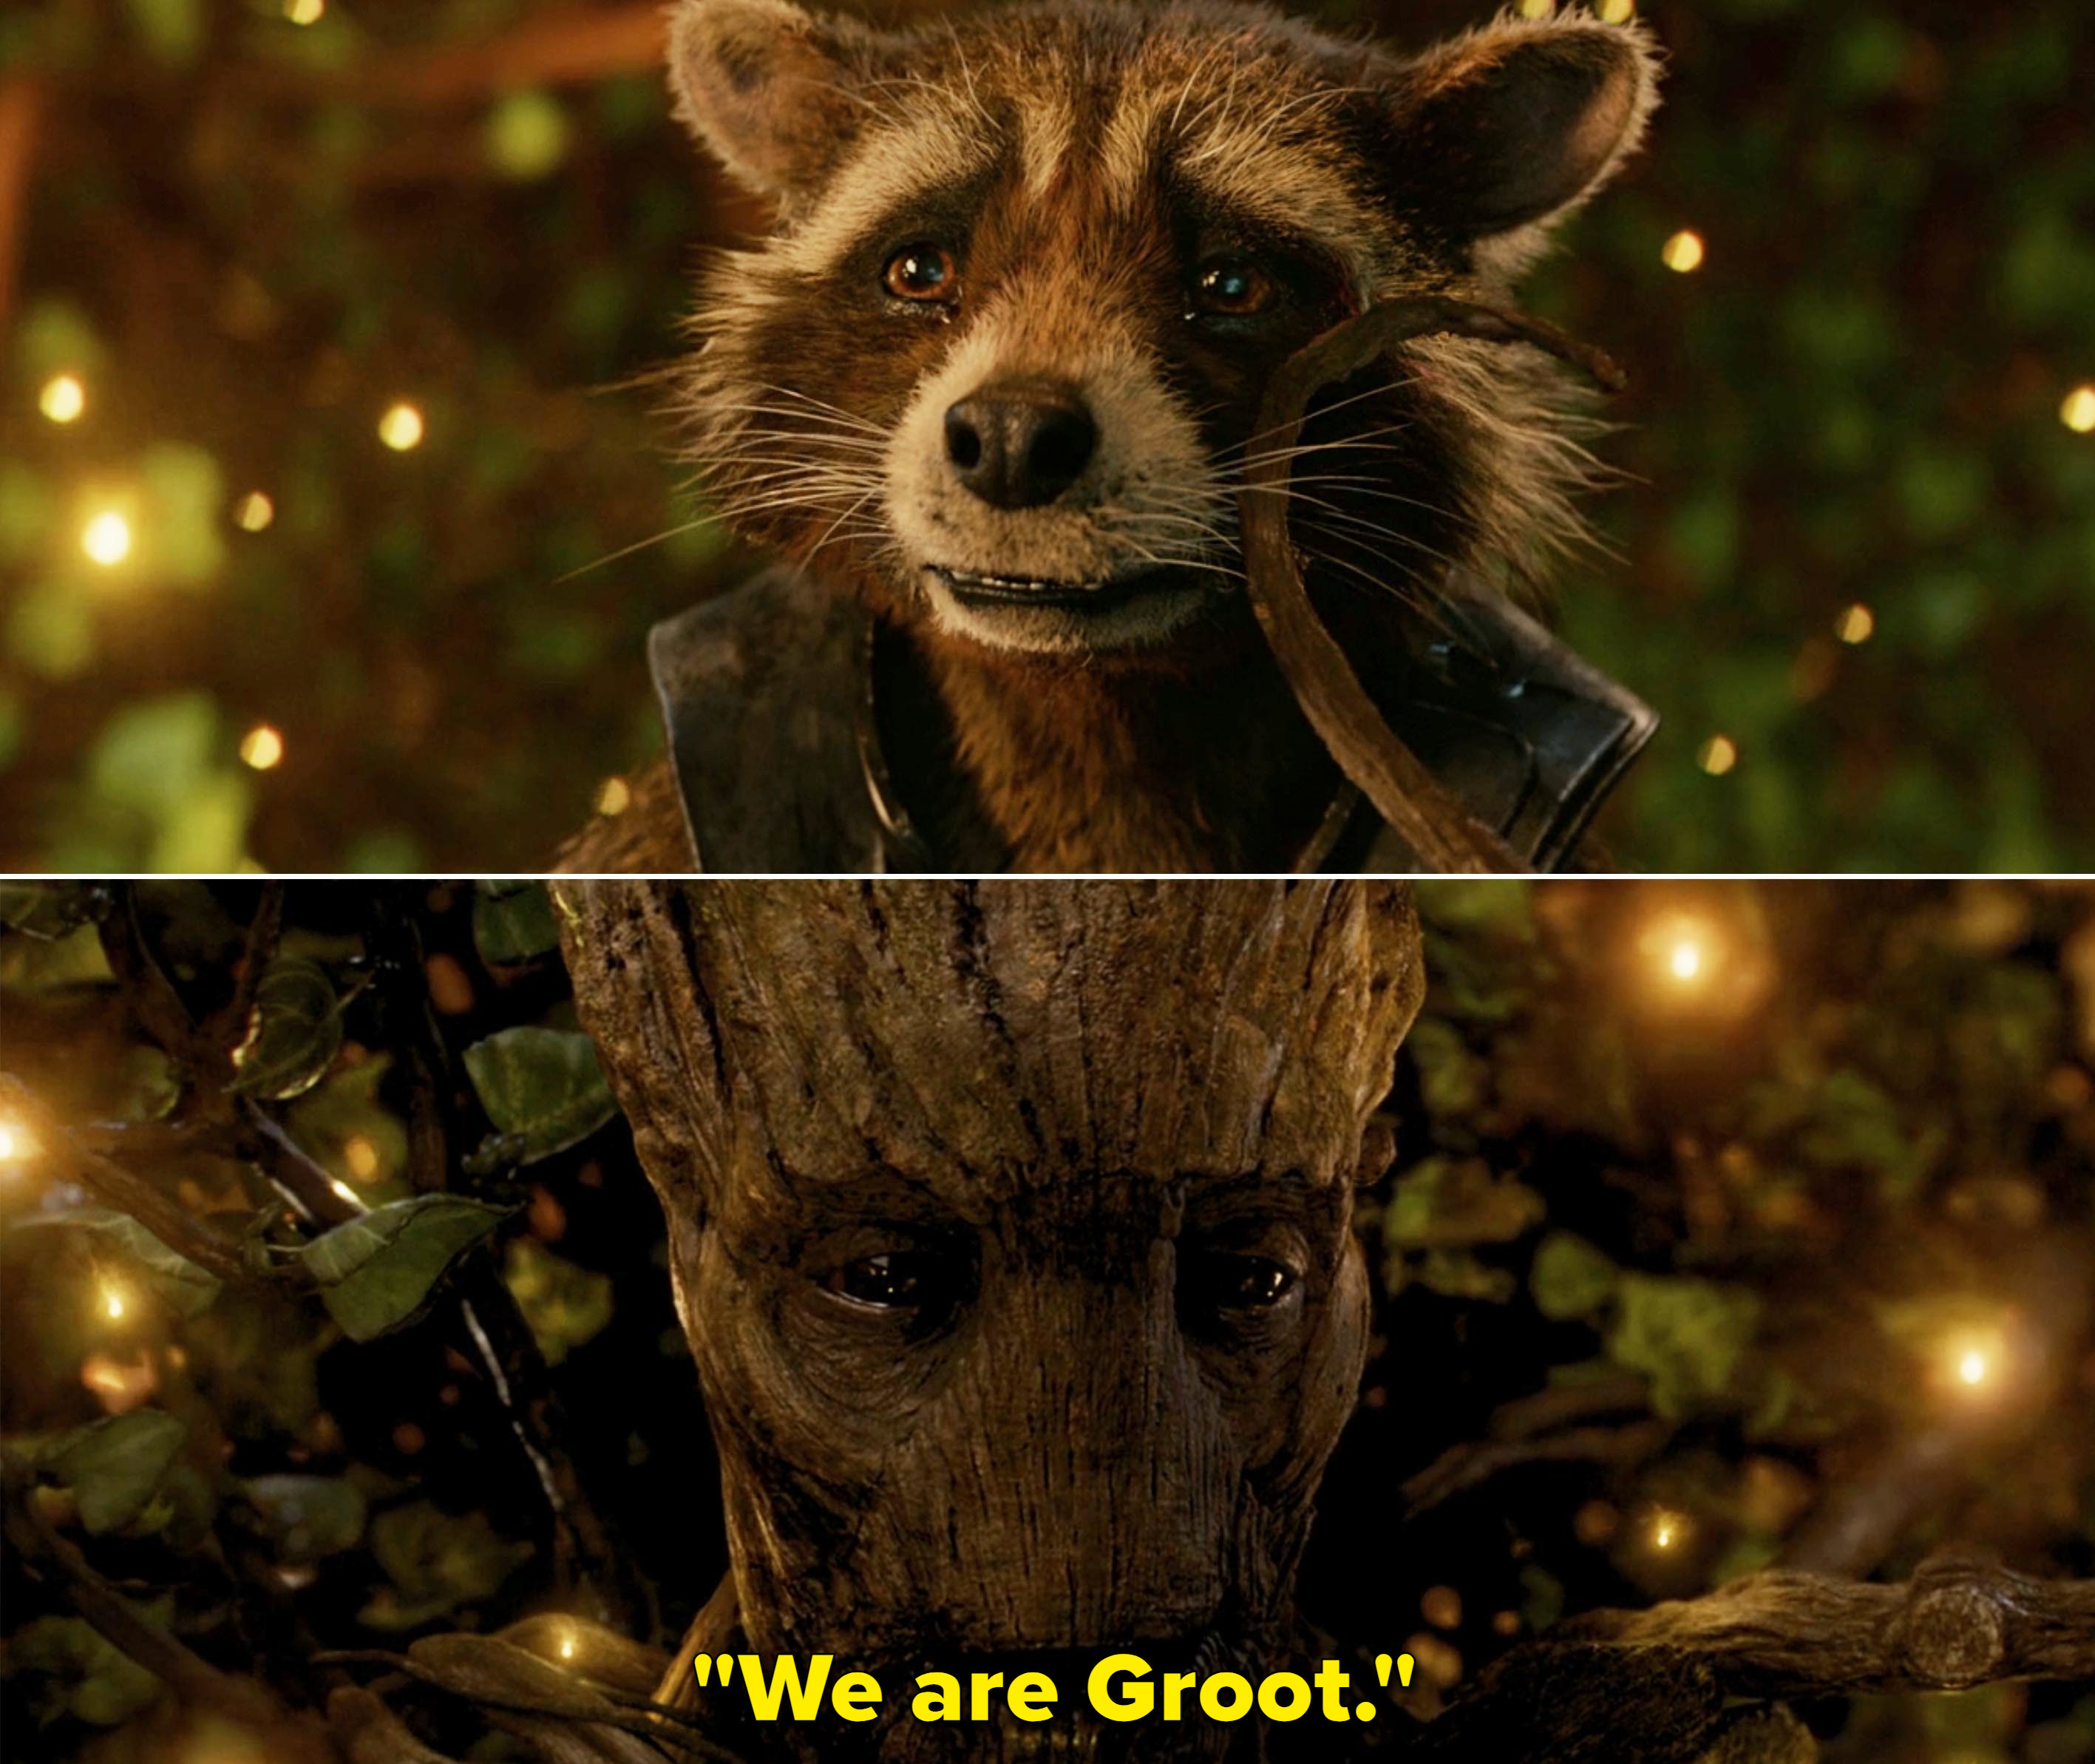 &quot;We are Groot.&quot;